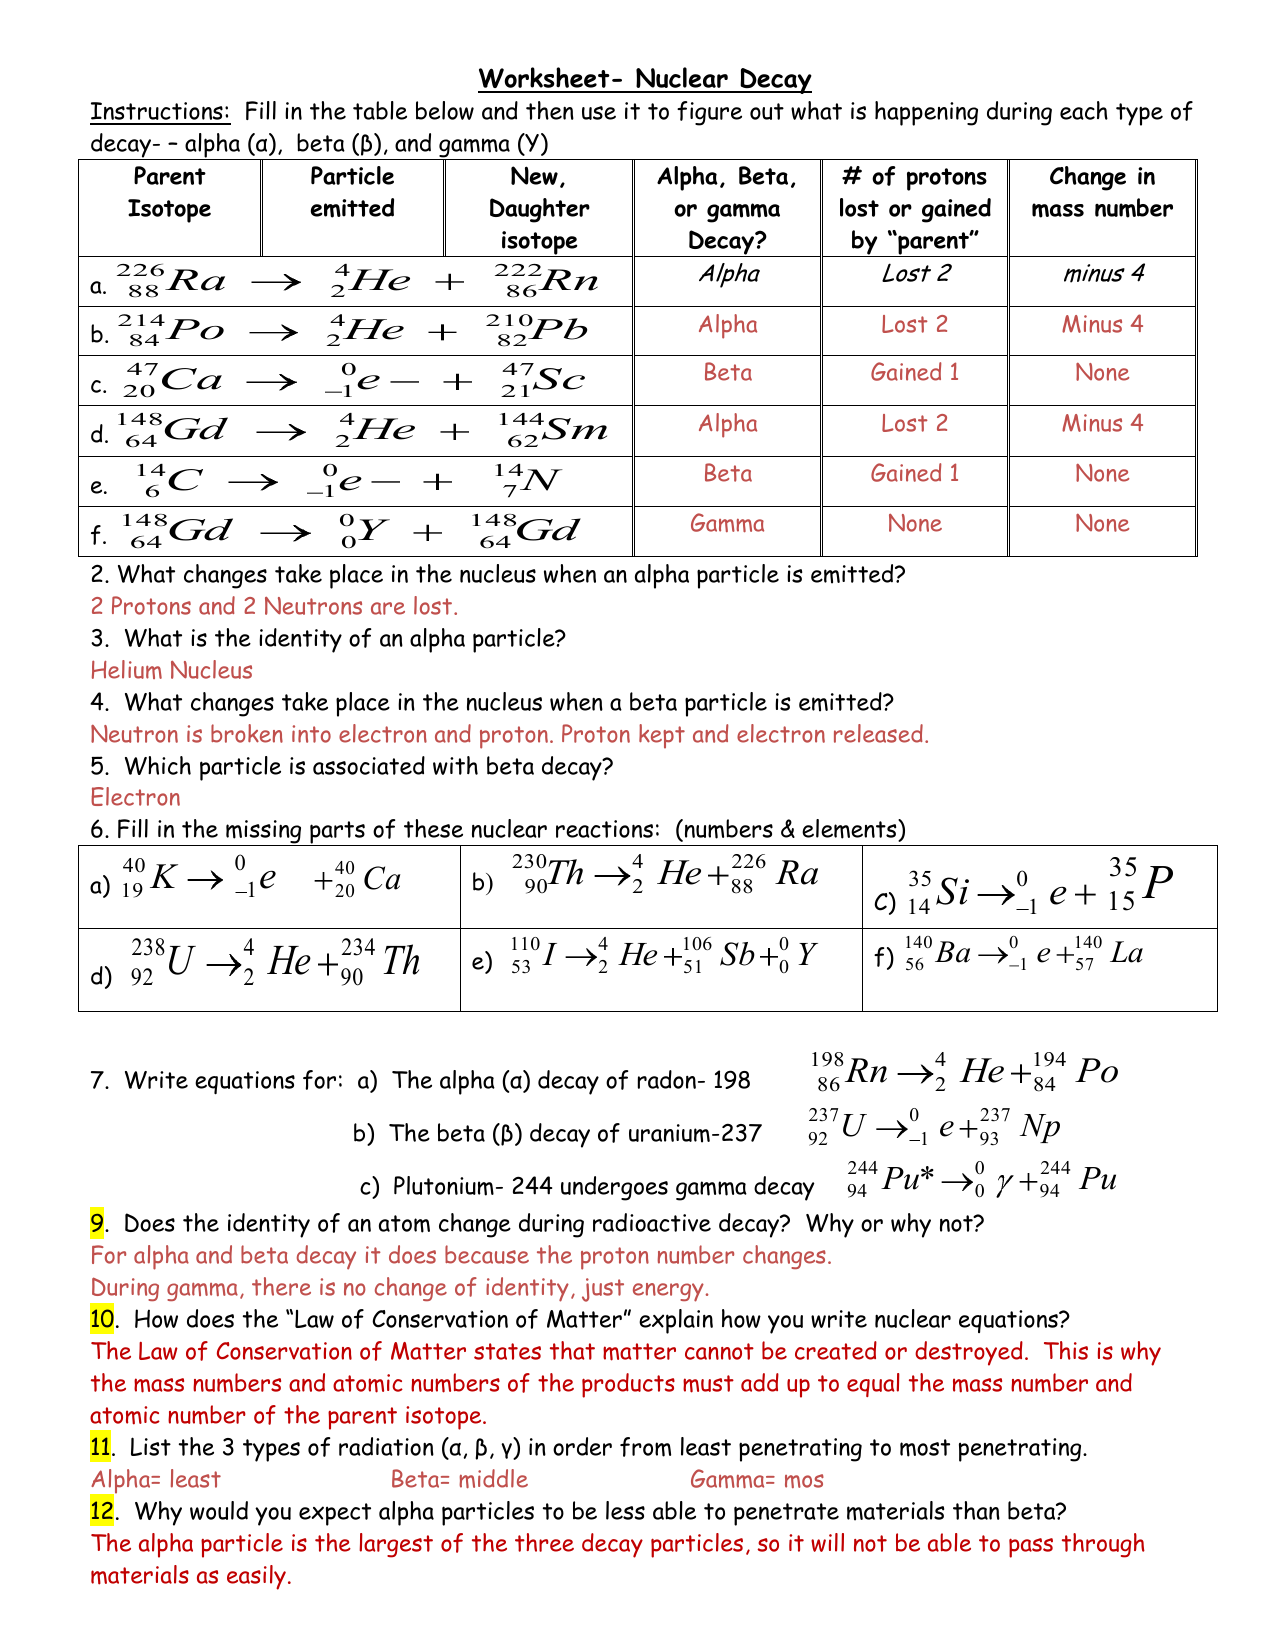 Worksheet- Nuclear Decay Regarding Nuclear Decay Worksheet Answers